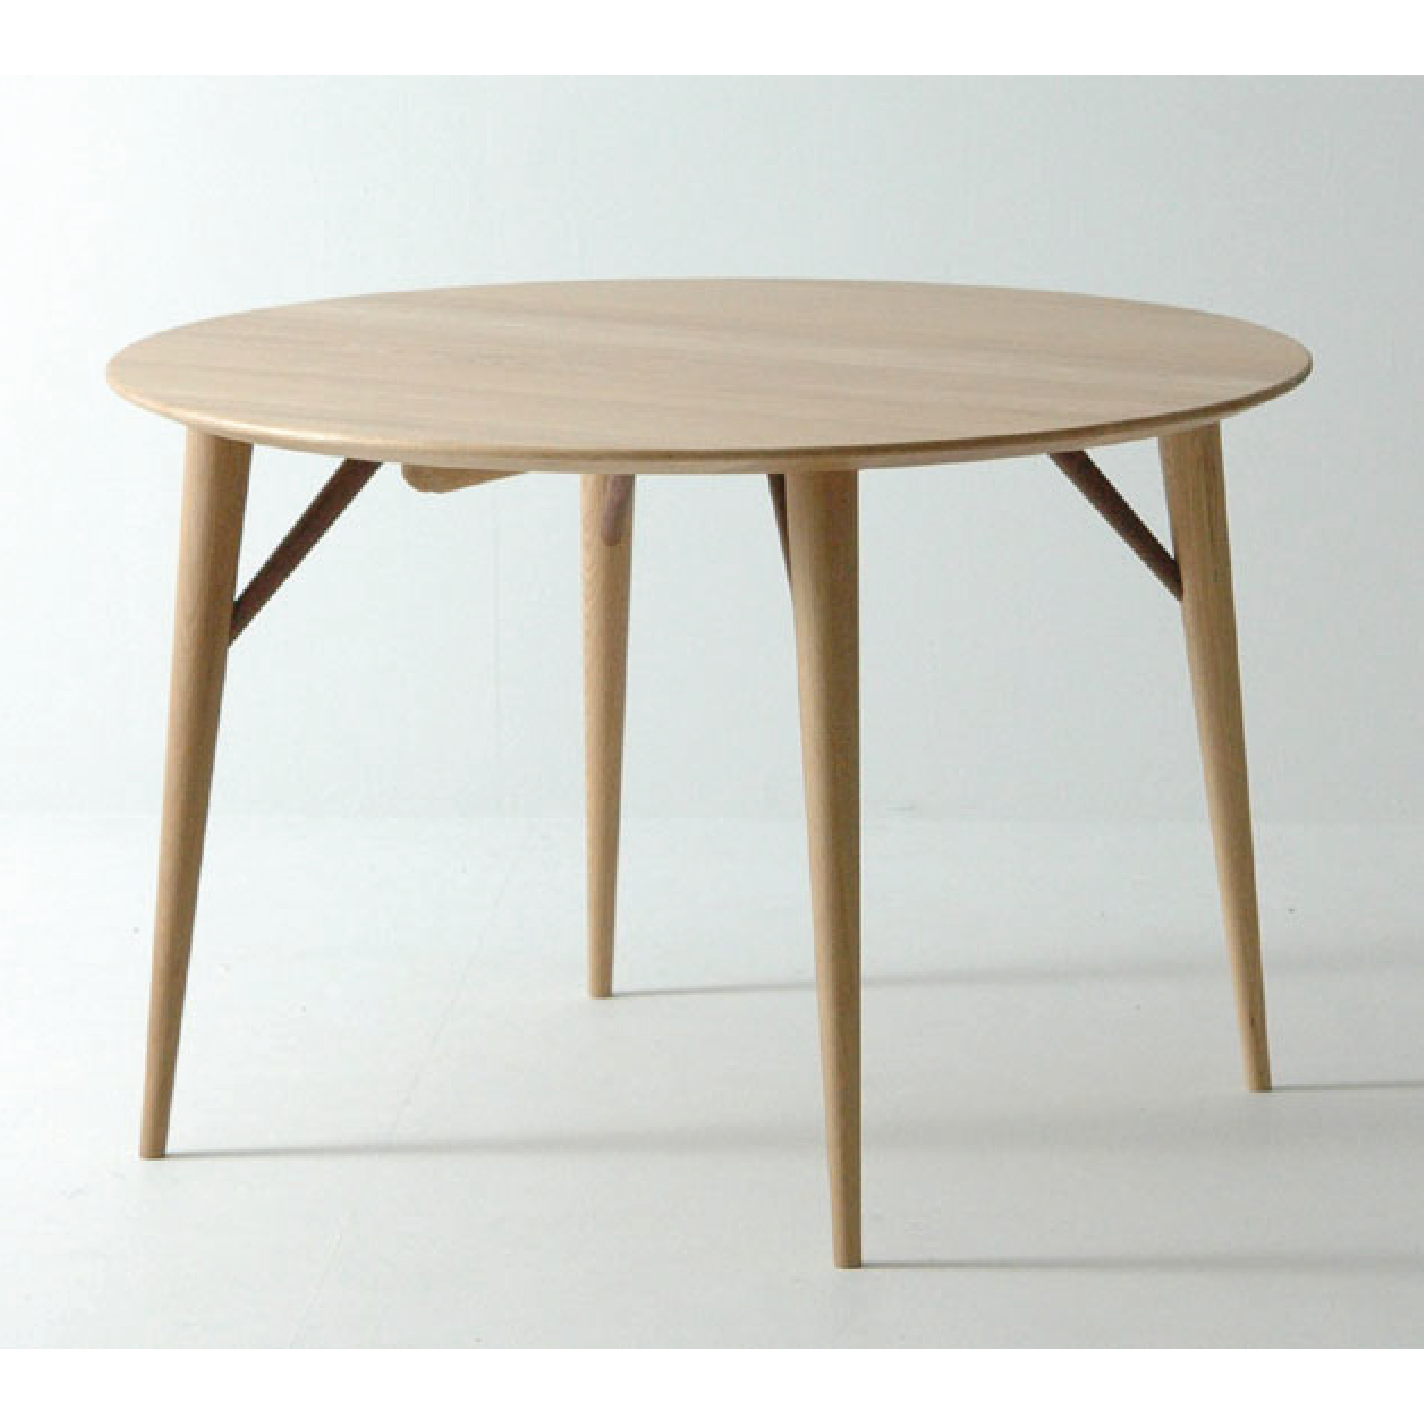 Nissin - White Wood Round Table